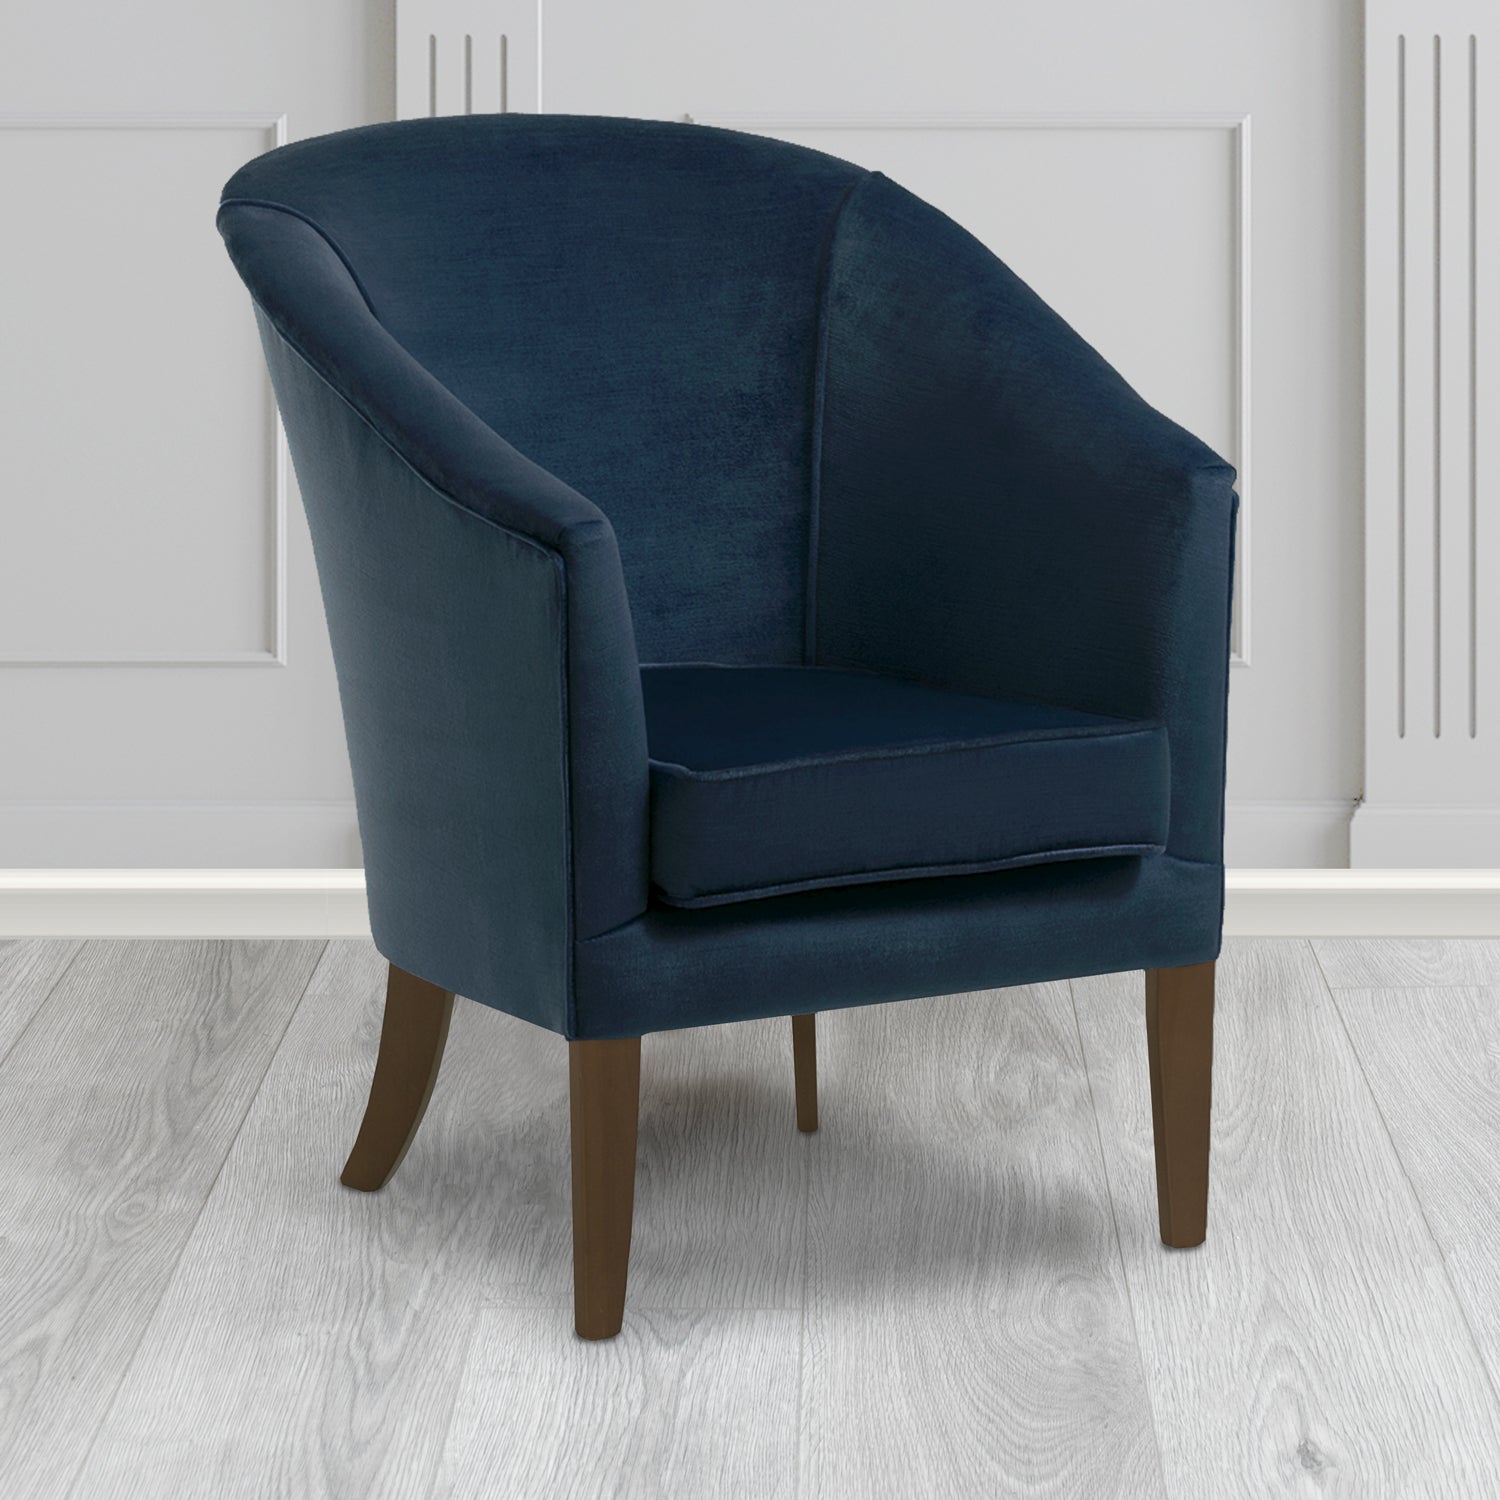 Burton Tub Chair in Noble 192 Ink Crib 5 Velvet Fabric - Water Resistant - The Tub Chair Shop